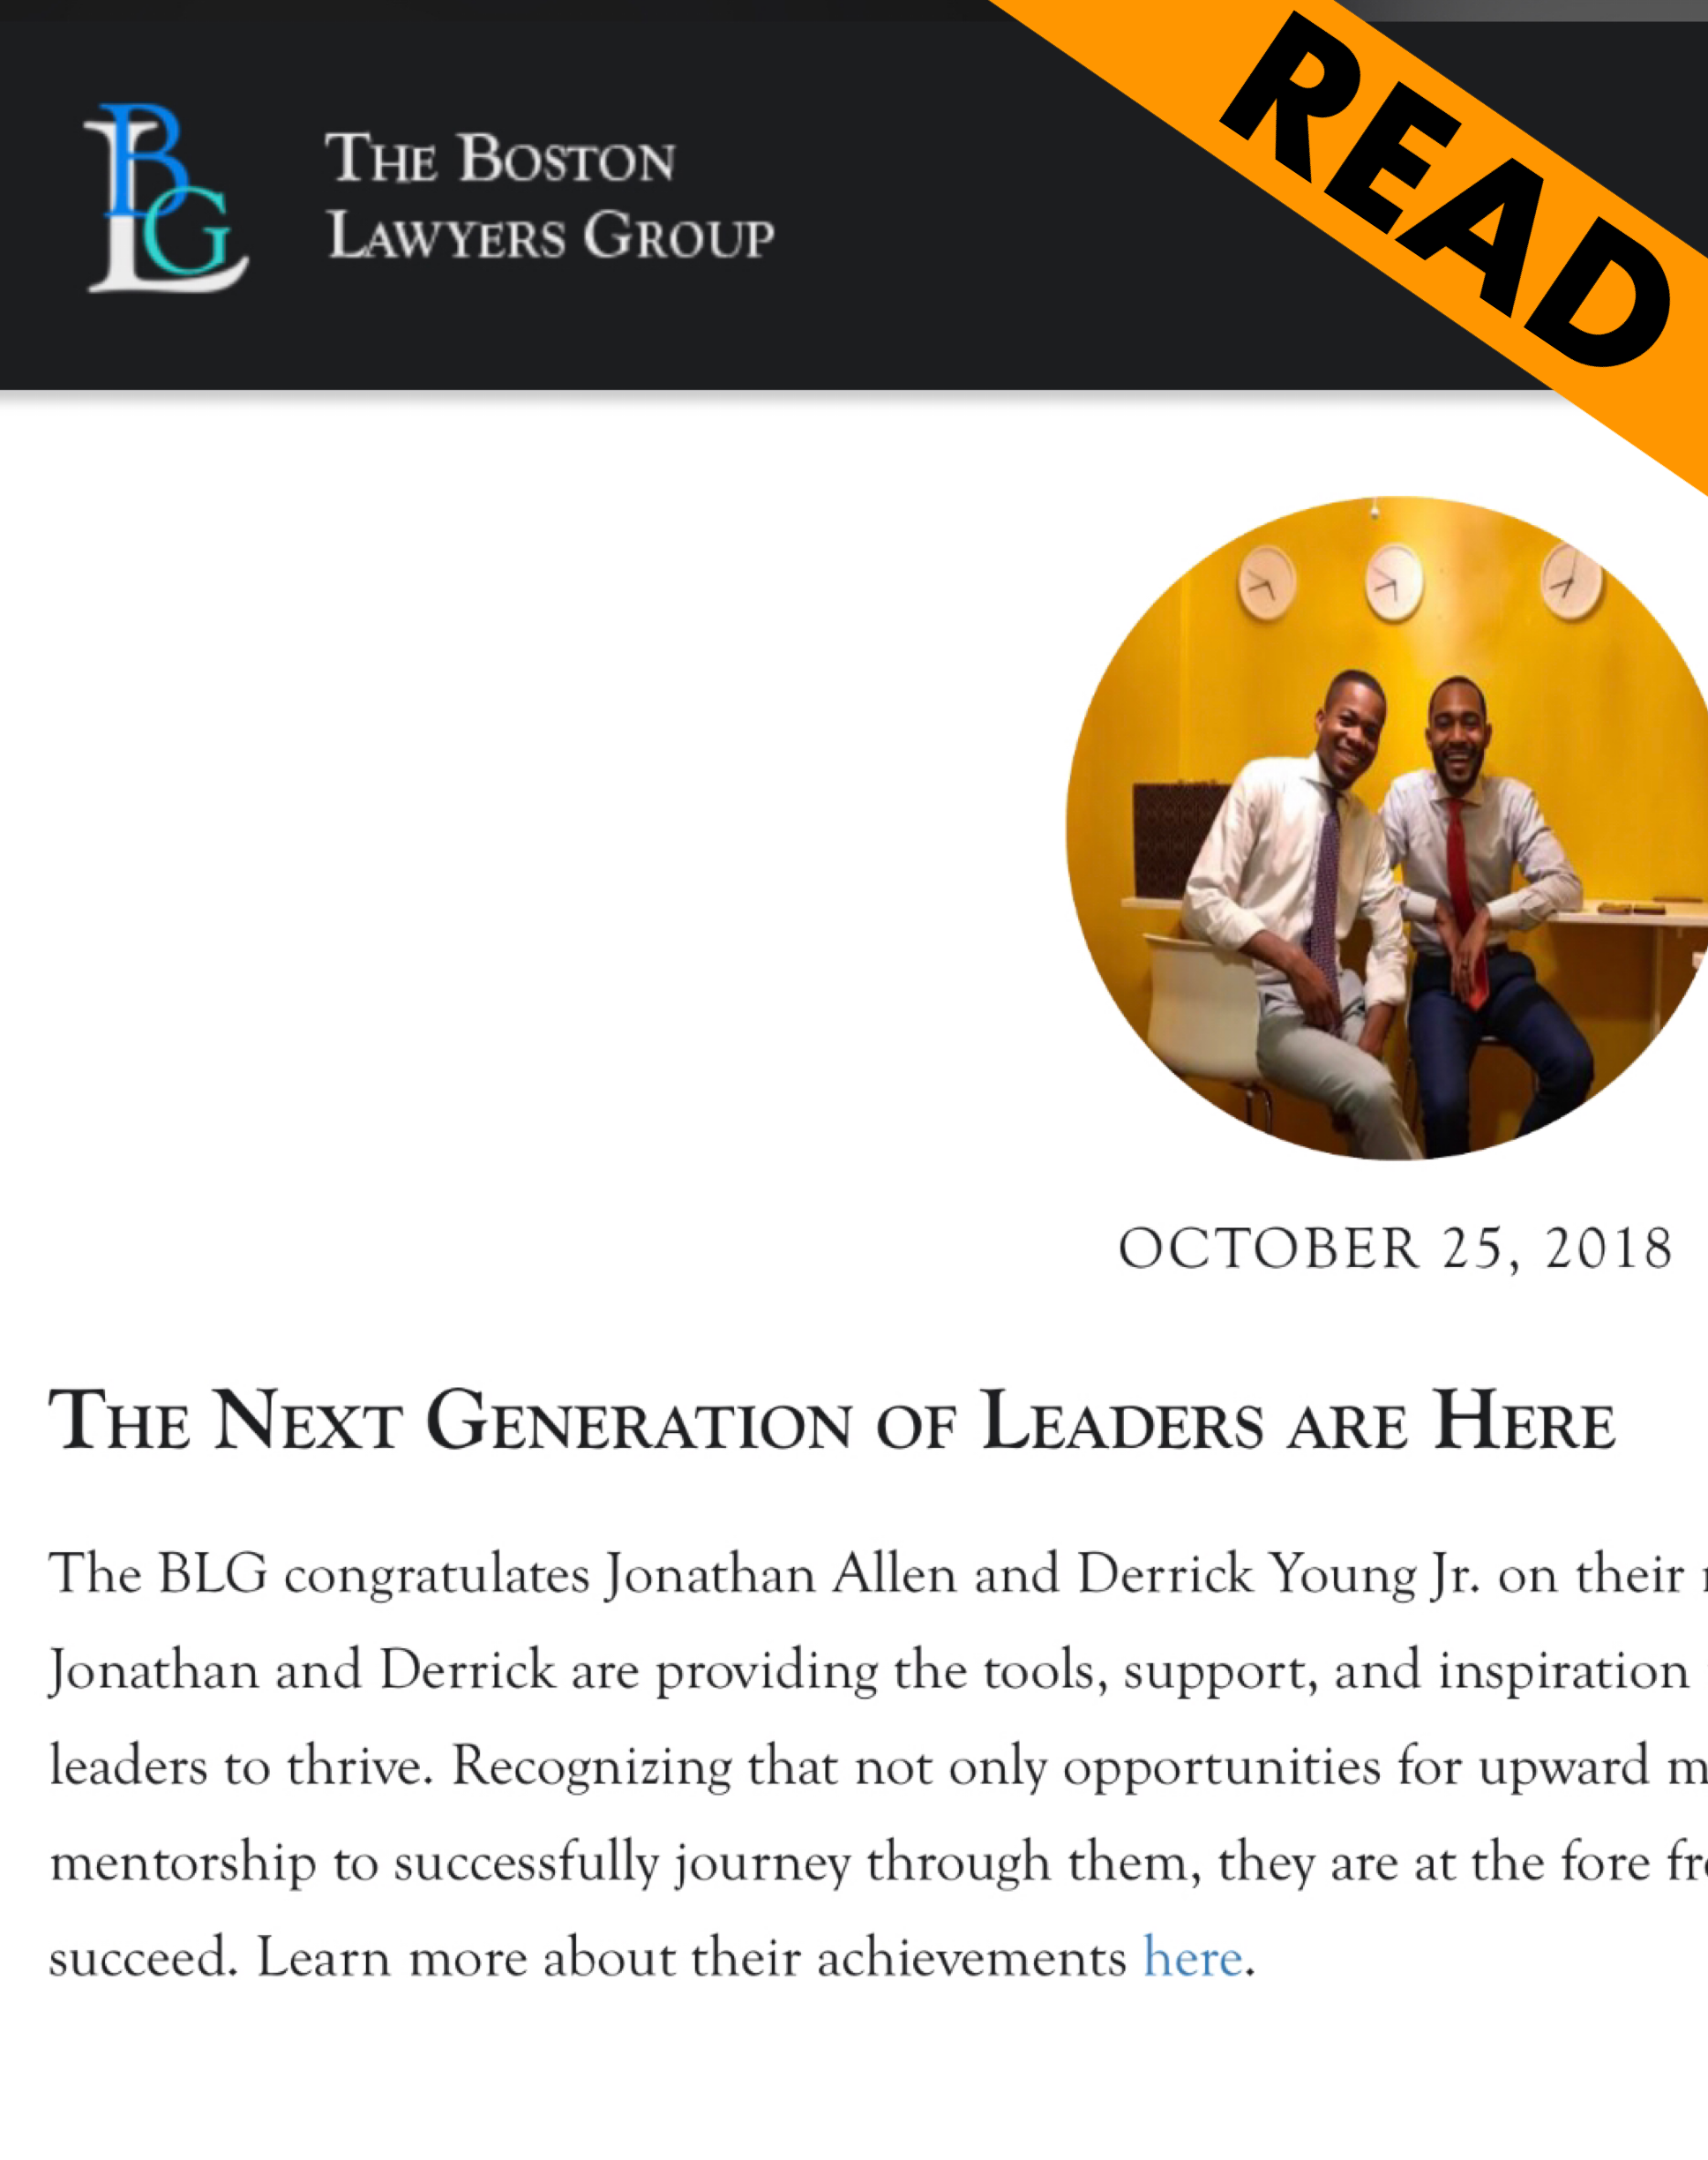 Next Generation of Leaders